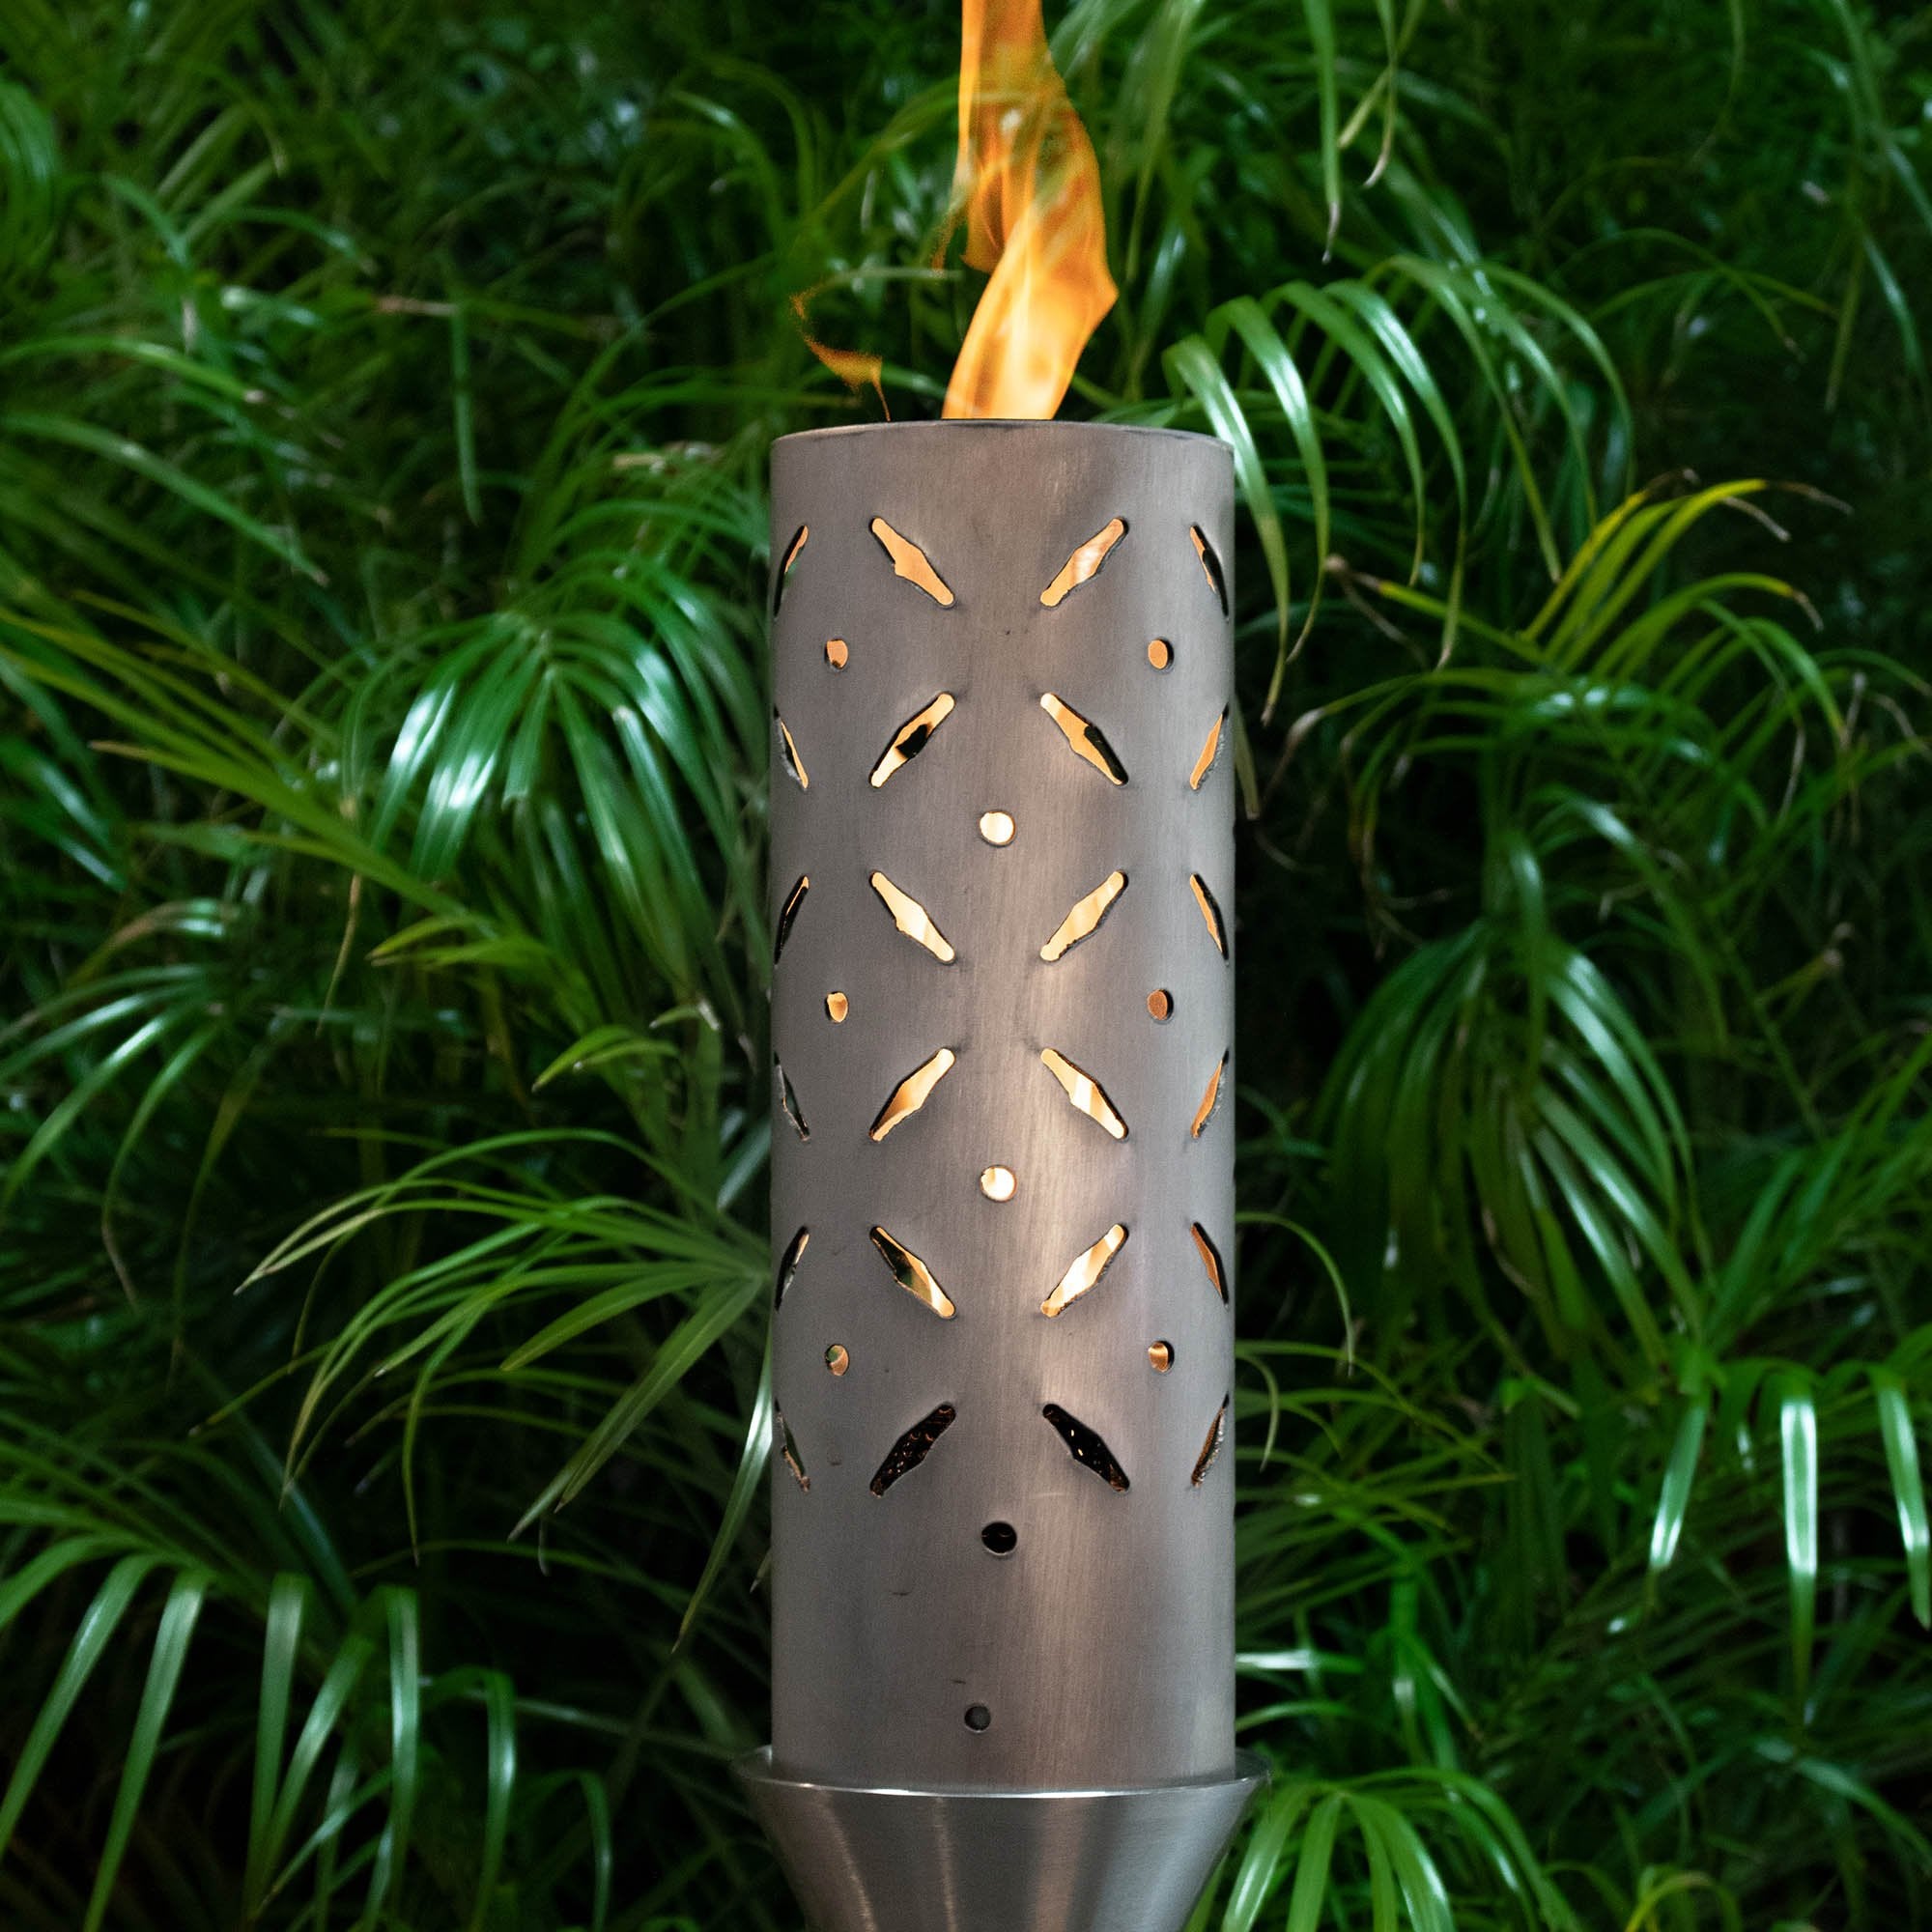 TOP FIRES DIAMOND PLATE Fire Torch 14" in Stainless Steel - Majestic Fountains